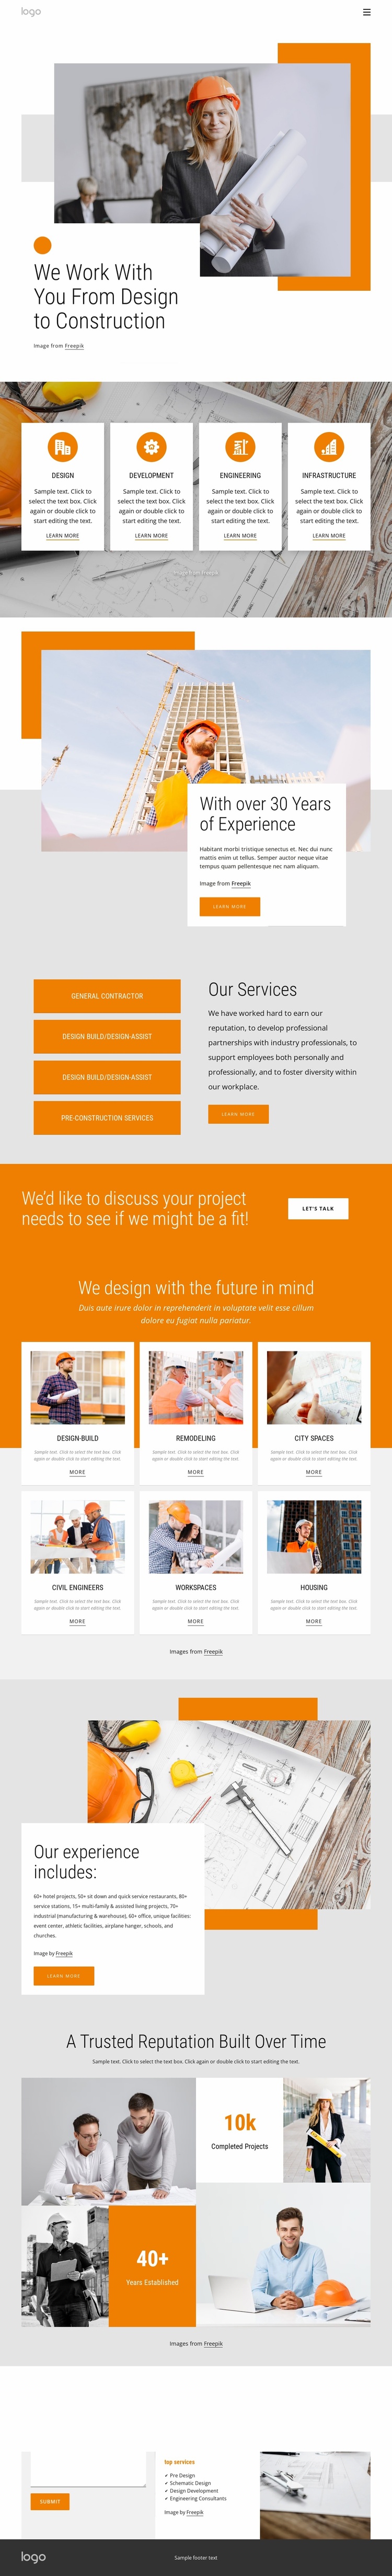 From design to construction Ecommerce Website Design